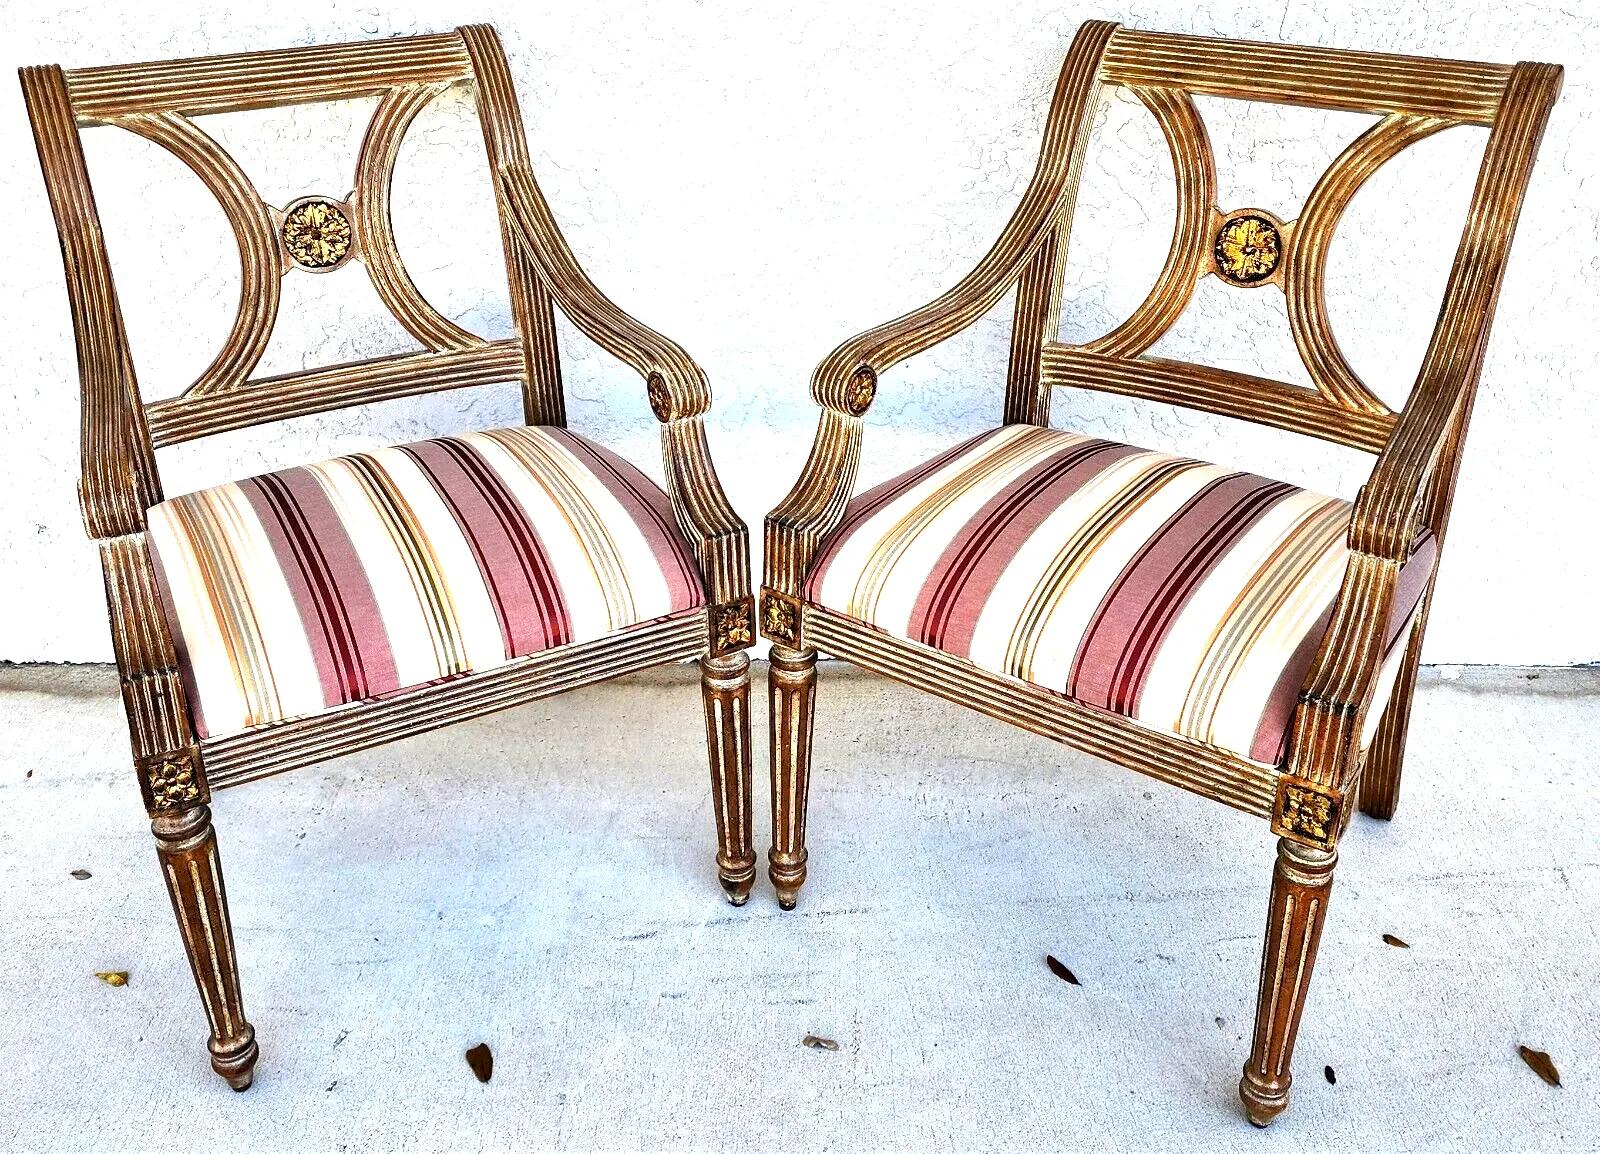 For FULL item description click on CONTINUE READING at the bottom of this page.

Offering One Of Our Recent Palm Beach Estate Fine Furniture Acquisitions Of A
Pair of Italian Neoclassical Armchairs by Thomasville
With gilt medallion